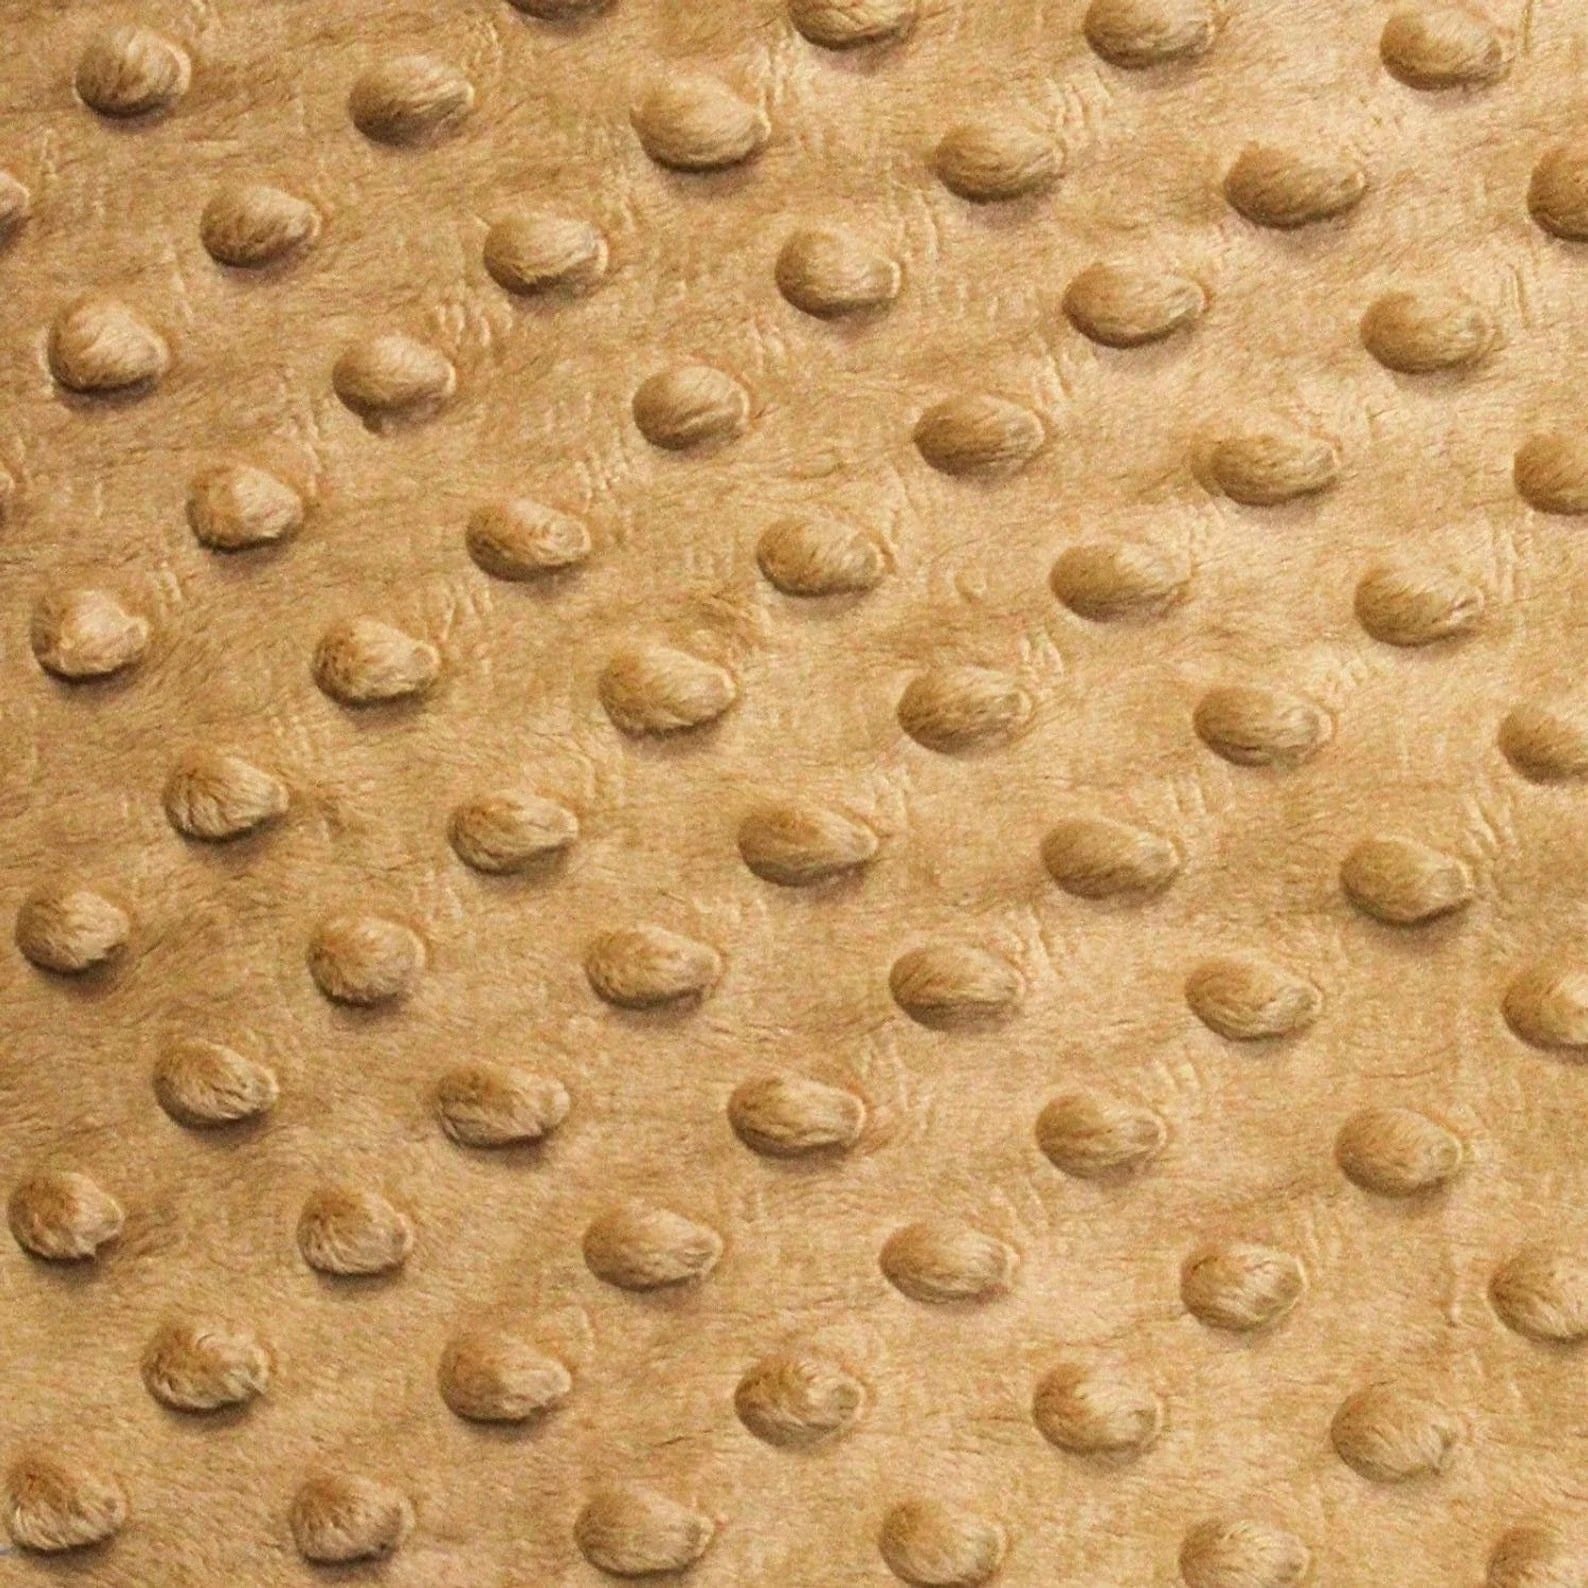 Dimple Dot Minky Fabric Sold By The Yard - 36"/ 58" Tan